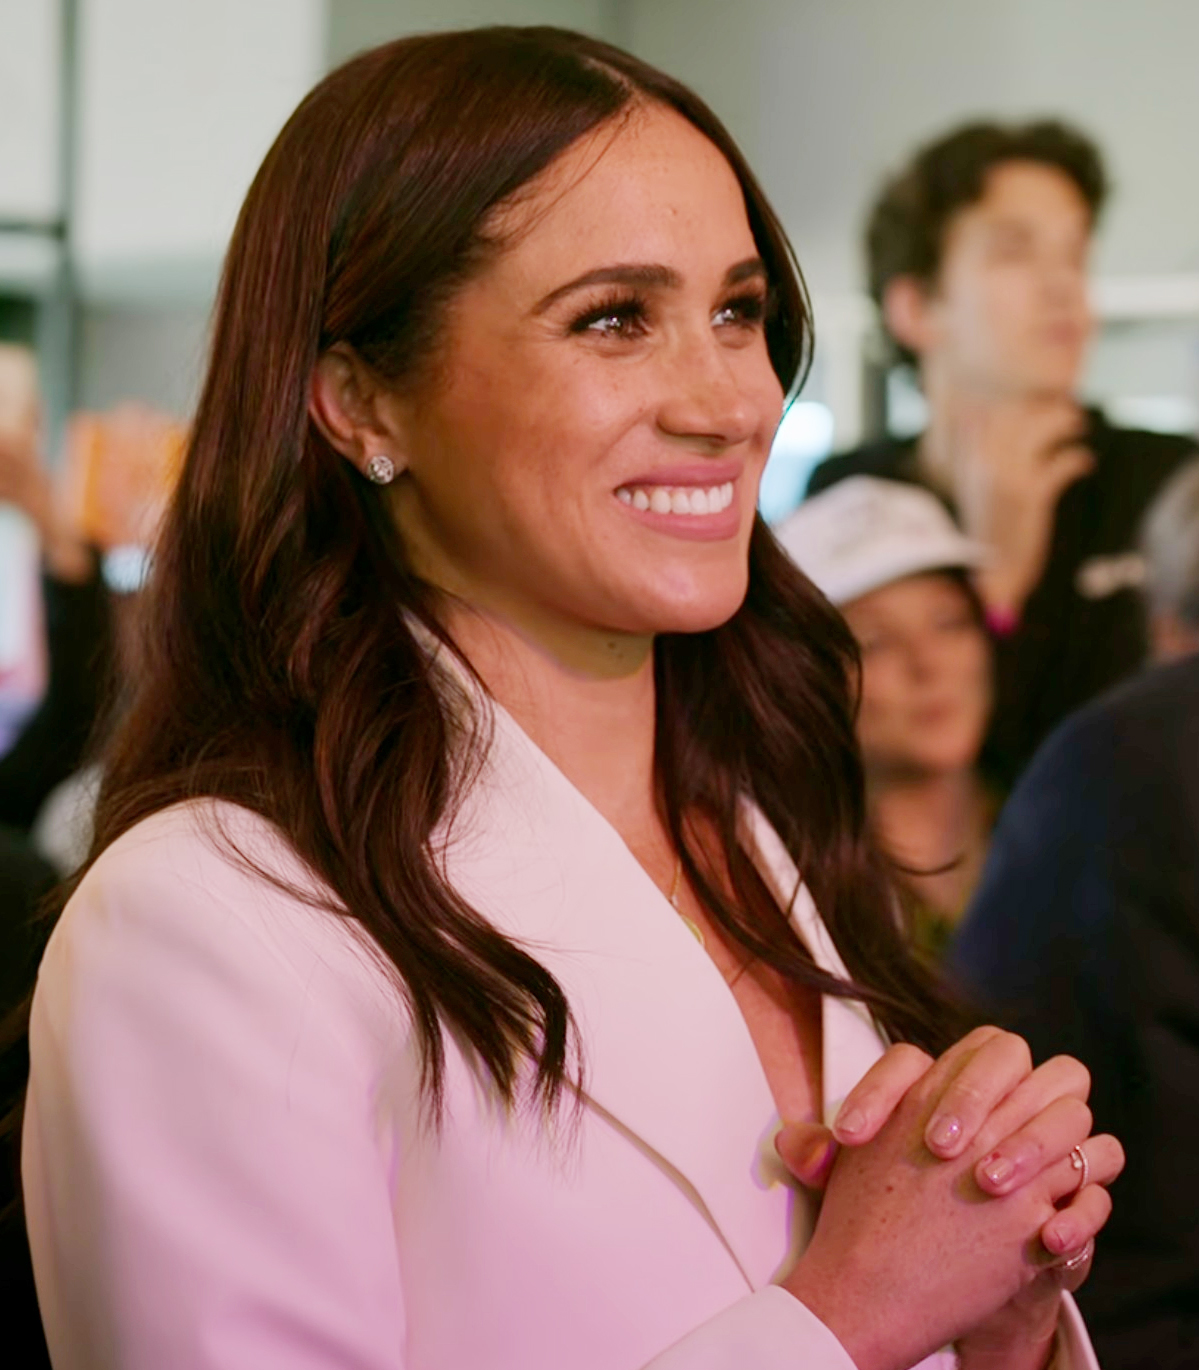 Meghan Markle’s next big move will be ‘new commercial venture’ which is ‘genuine to who she is’ after string of failures